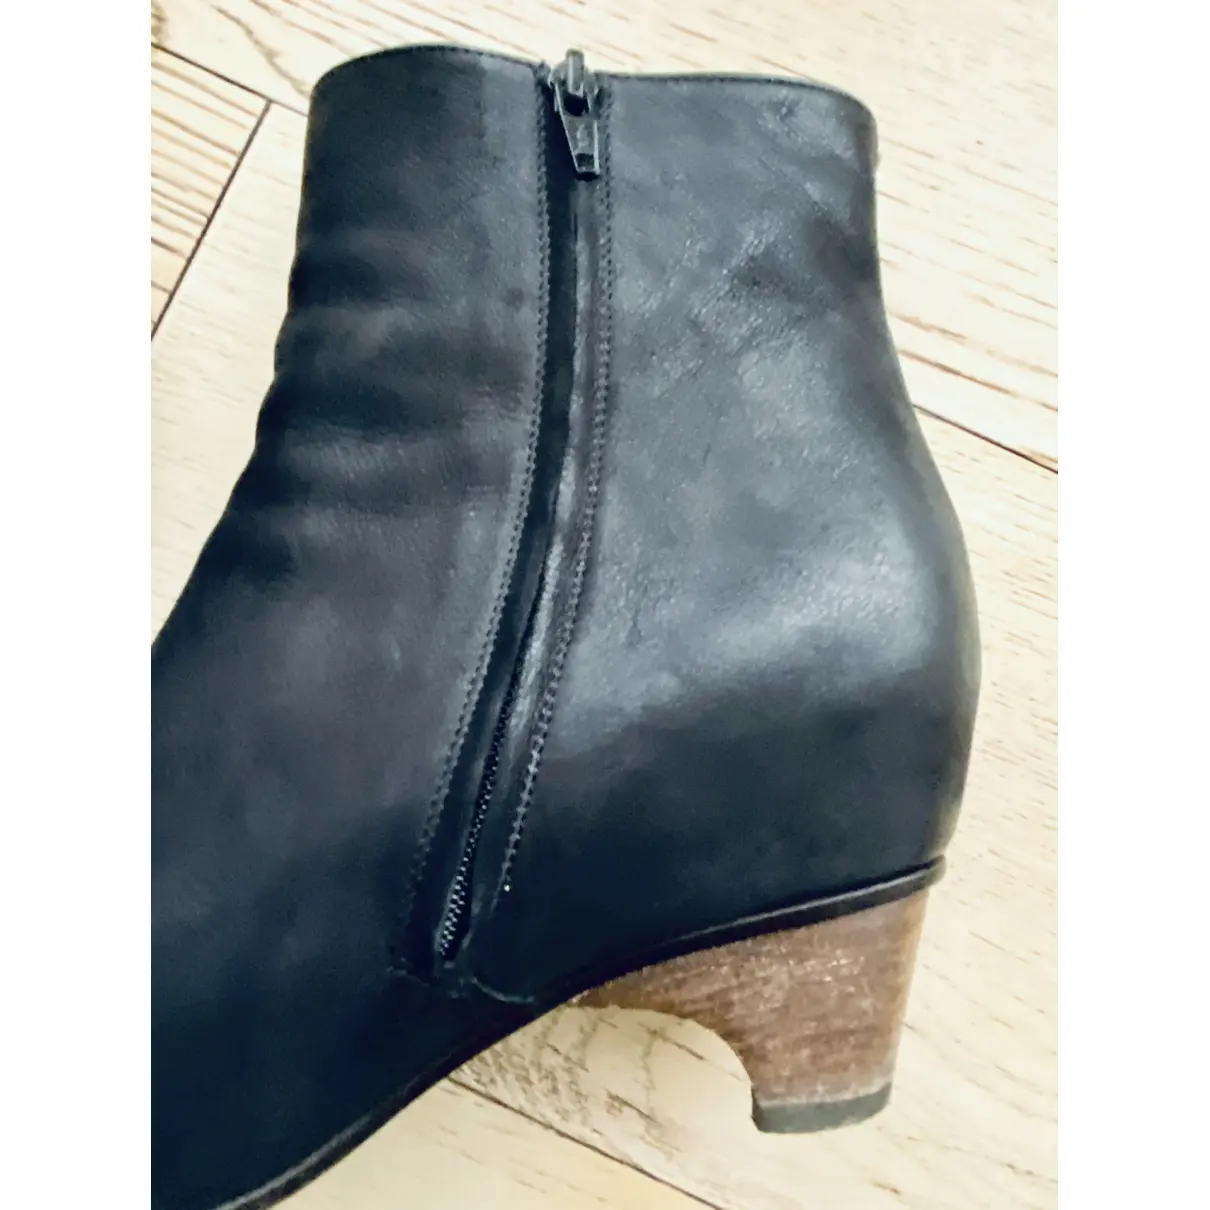 Buy Maison Martin Margiela Leather ankle boots online